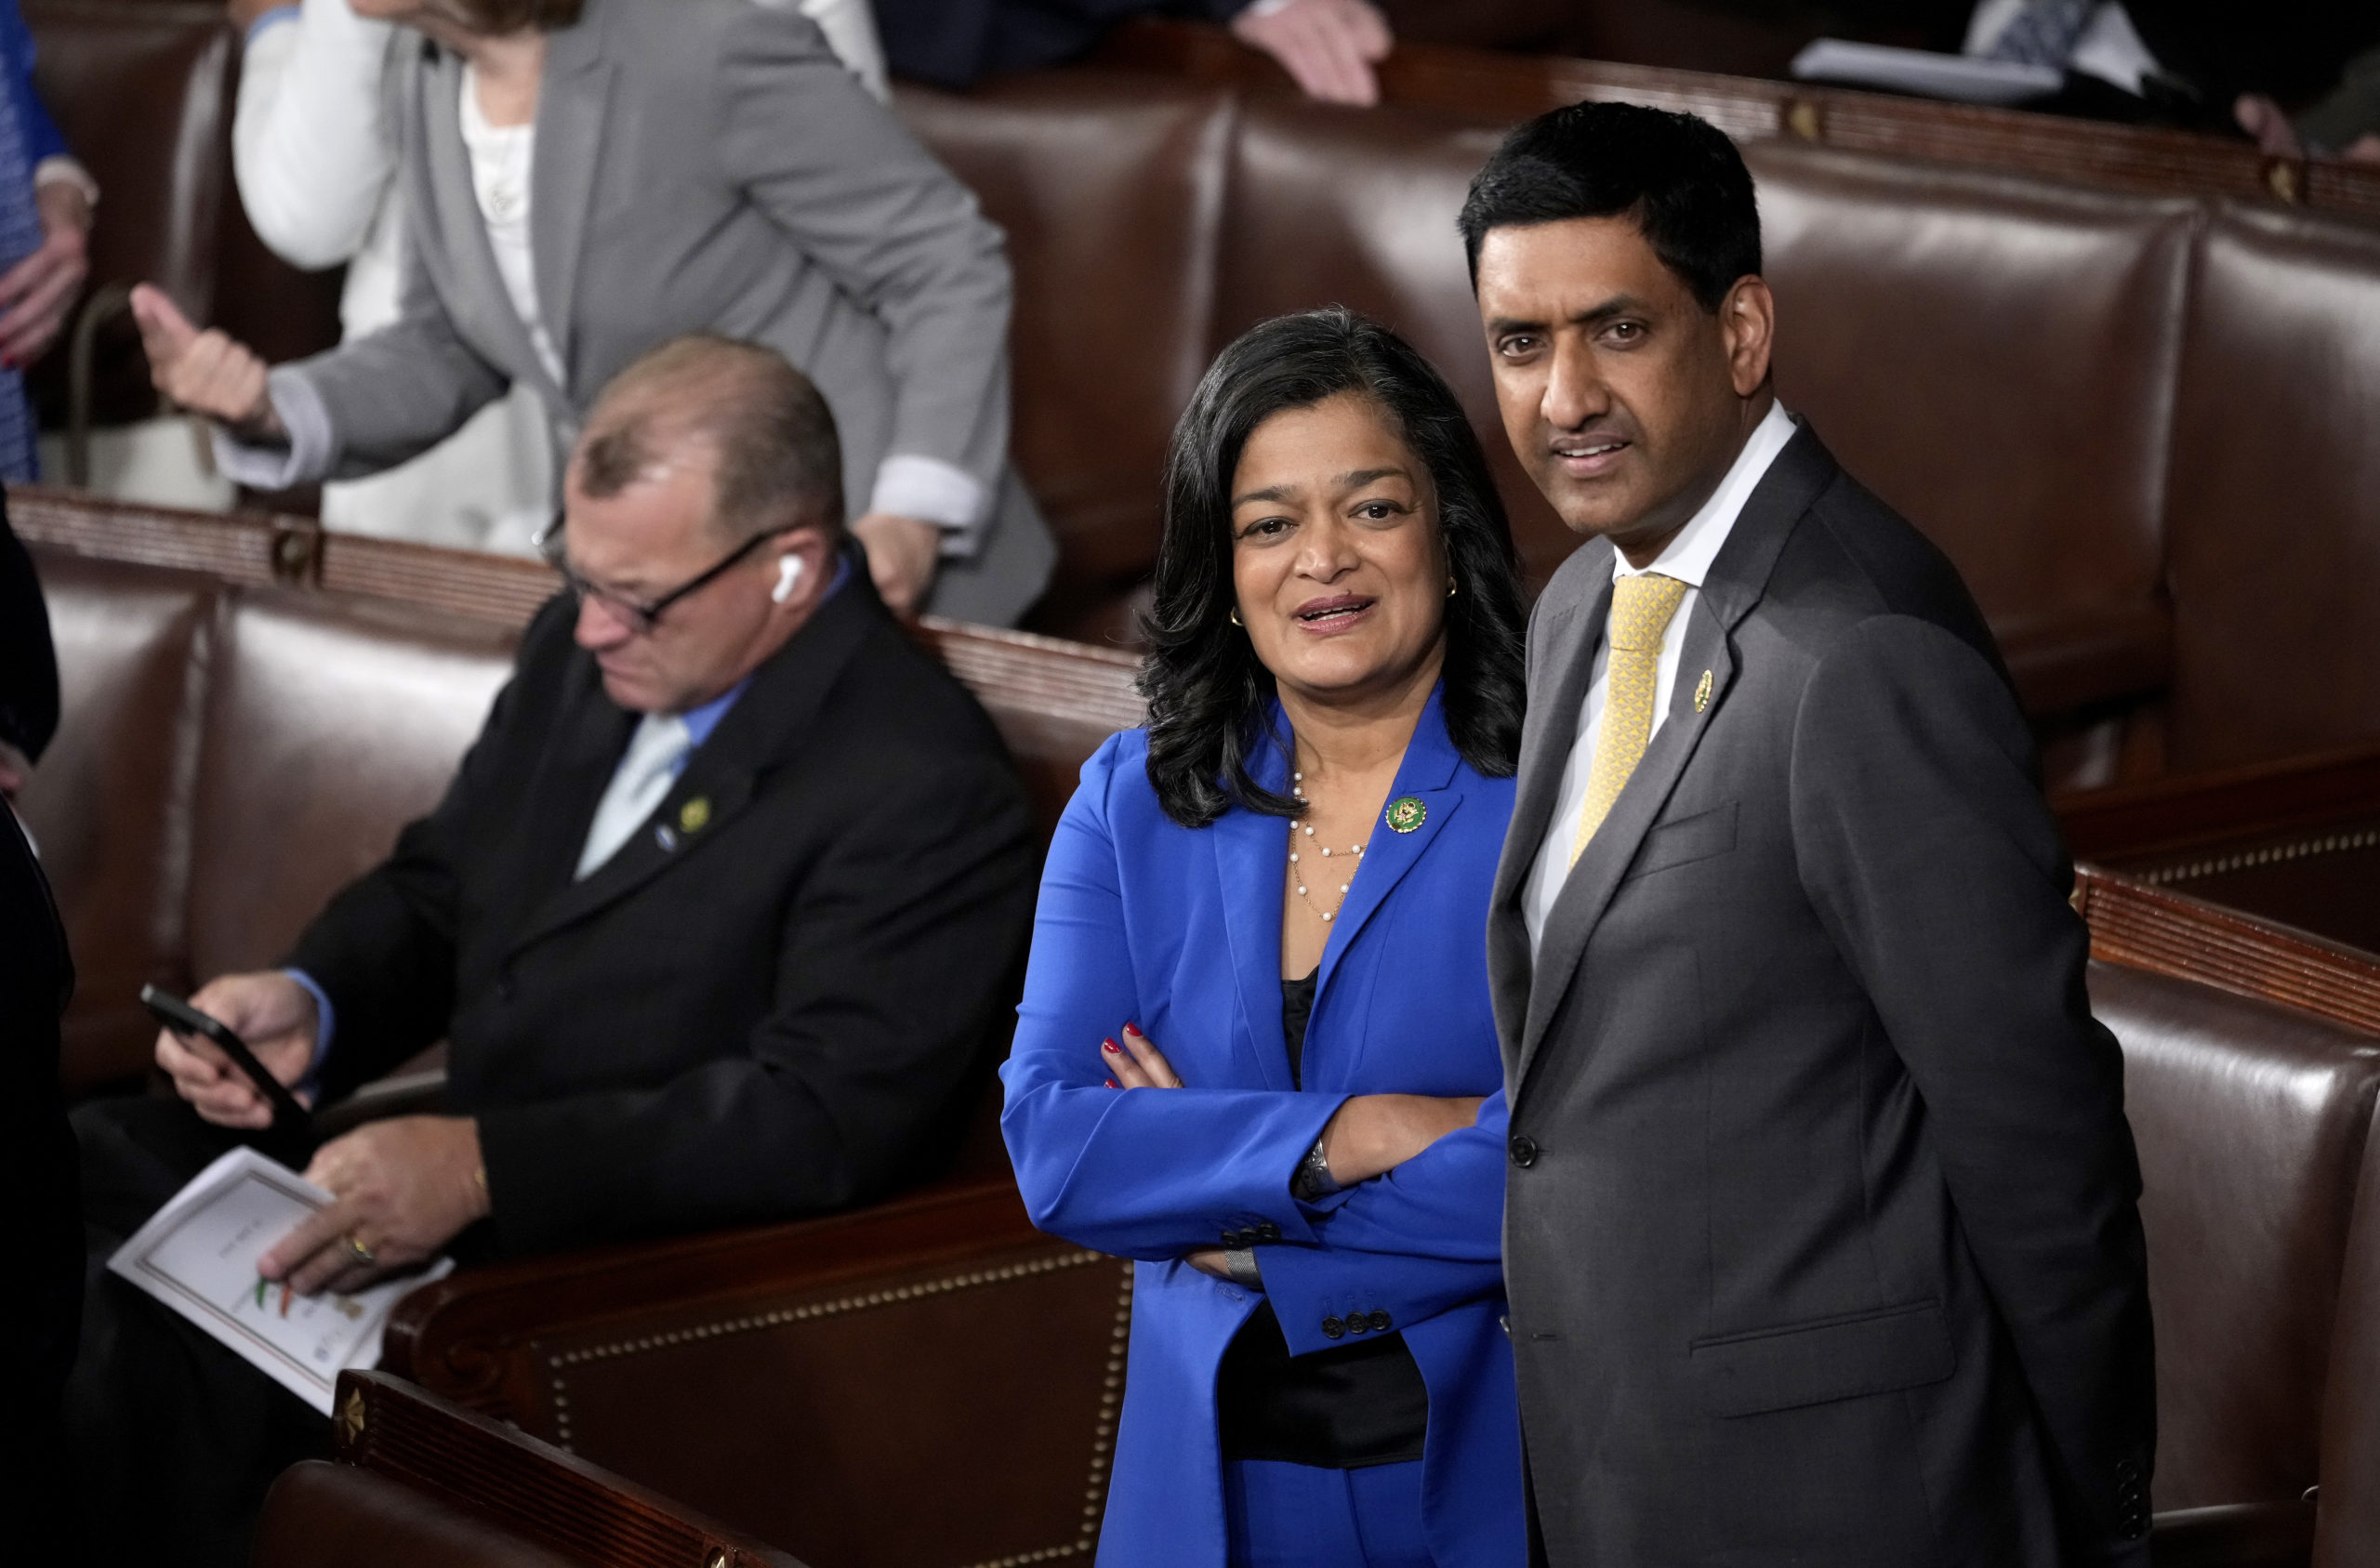 WASHINGTON, DC - JUNE 22: U.S. Rep. Pramila Jayapal (D-WA) and Rep. Ro Khanna (D-CA) wait for an address by Indian Prime Minister Narendra Modi during a joint meeting of Congress at the U.S. Capitol on June 22, 2023 in Washington, DC. Modi is on his first official state visit to the United States and has met with President Biden, Congressional leaders and will visit the State Department tomorrow to discuss strengthening India - U.S. relations. (Photo by Drew Angerer/Getty Images)